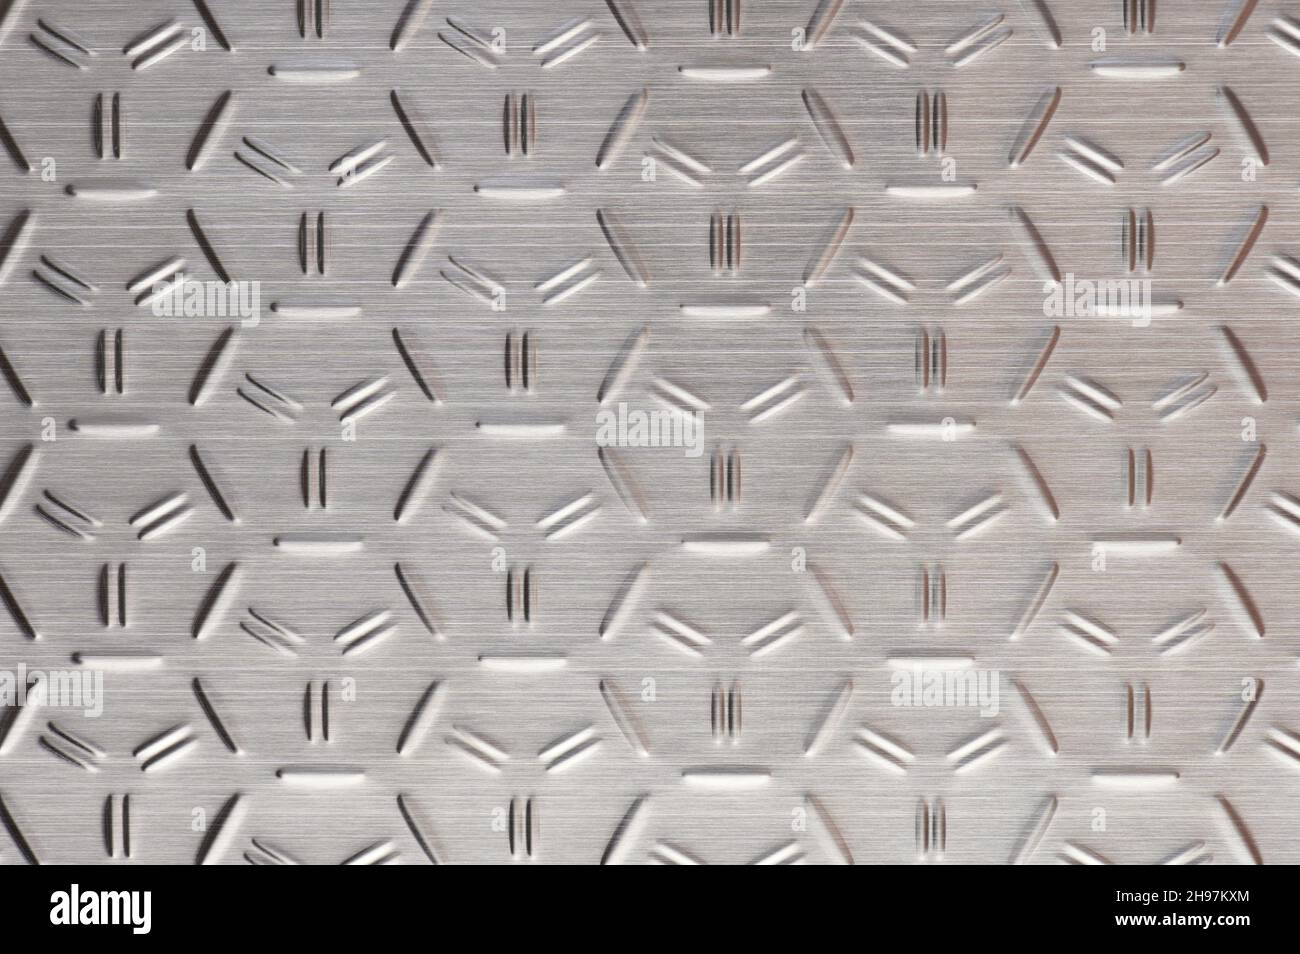 Industrial metal meshed shiny floor background close up Stock Photo